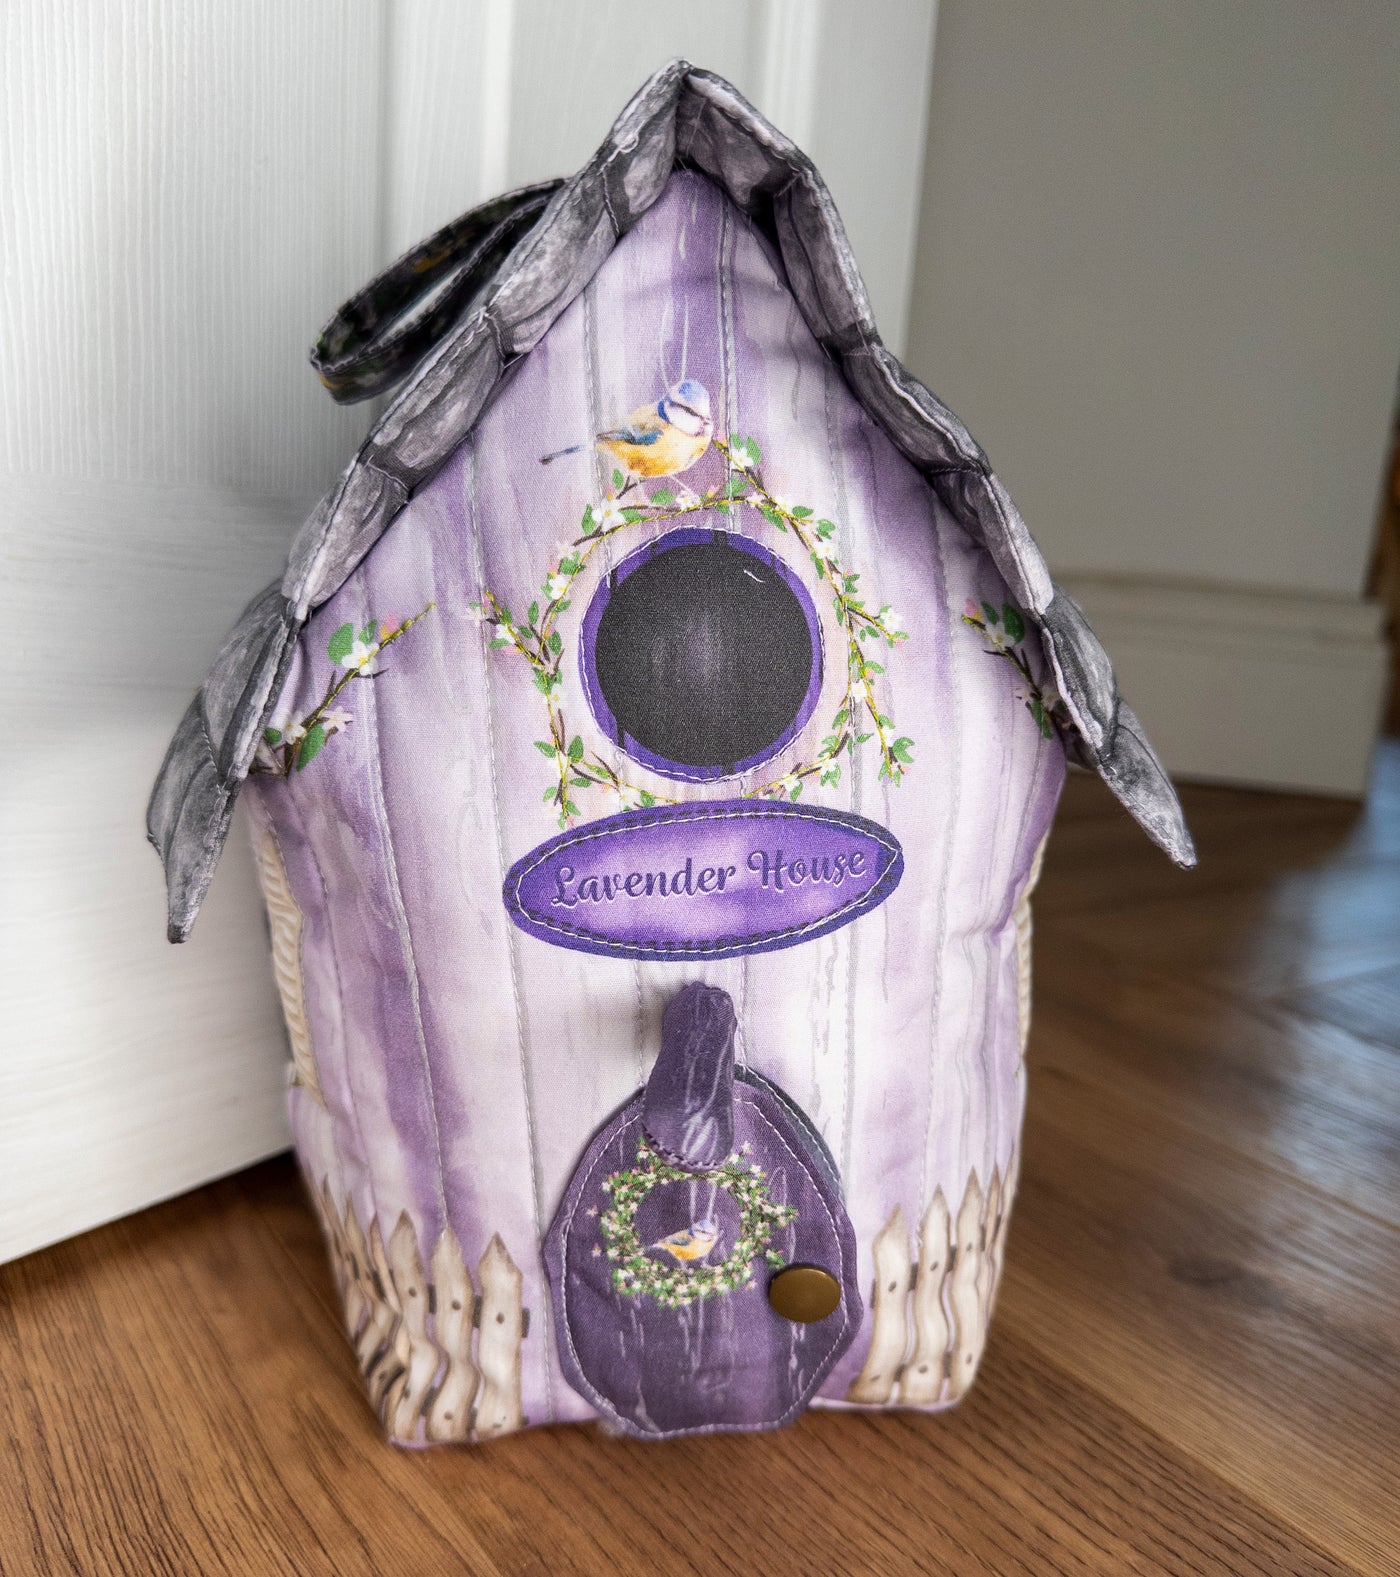 The Birdhouse Doorstop - Lavender House Sewing Kit